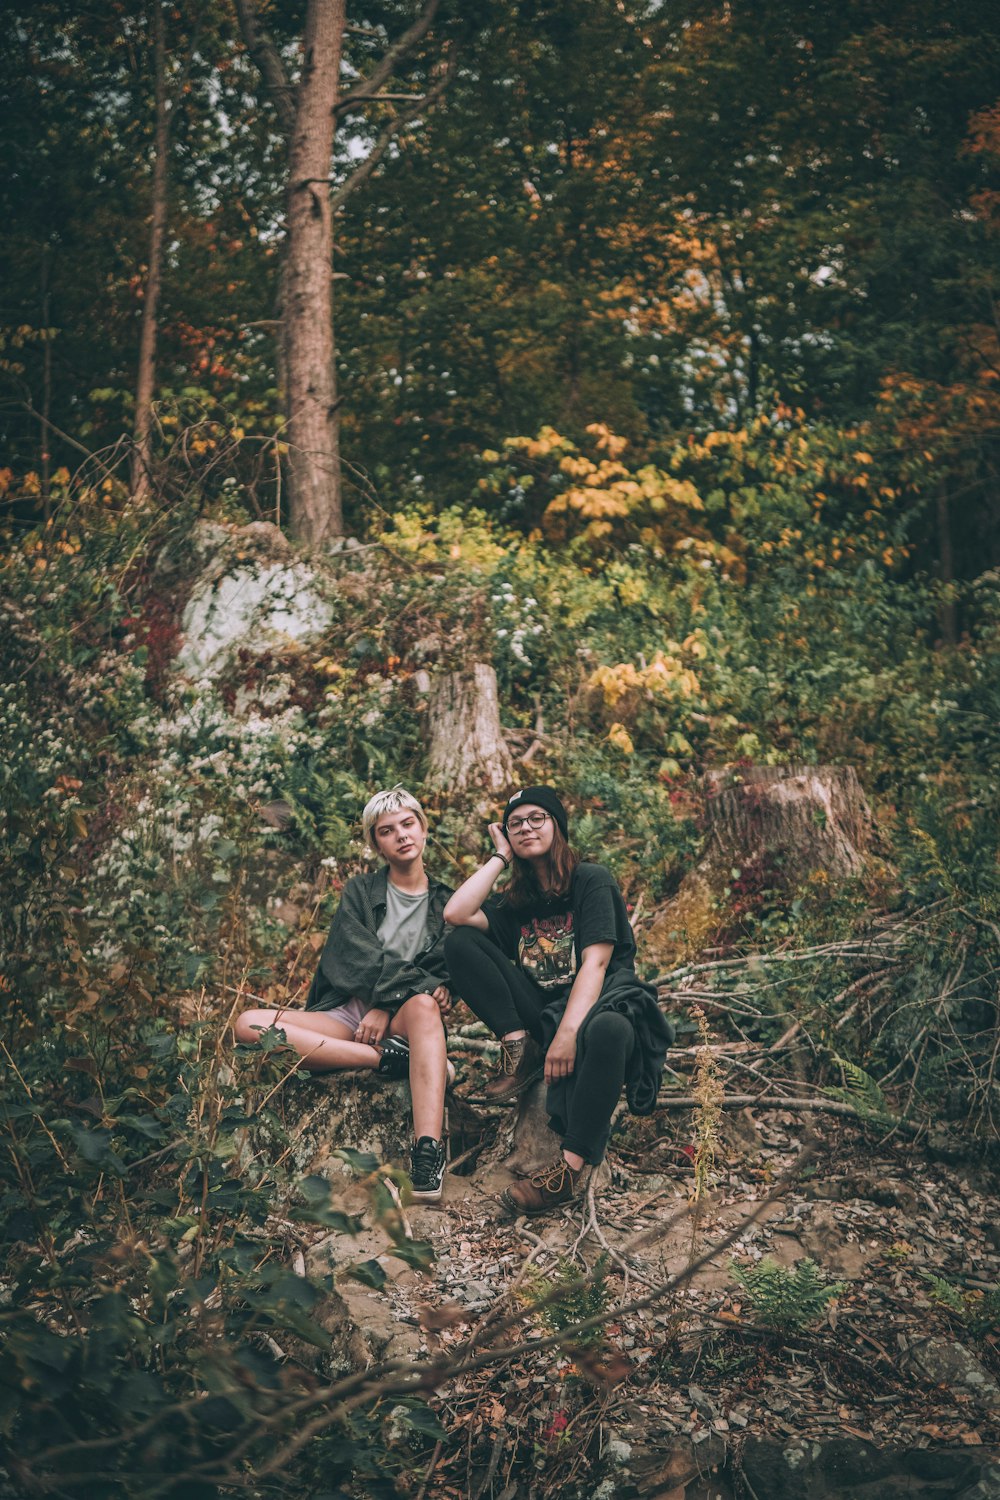 man and woman sitting on ground surrounded by trees during daytime